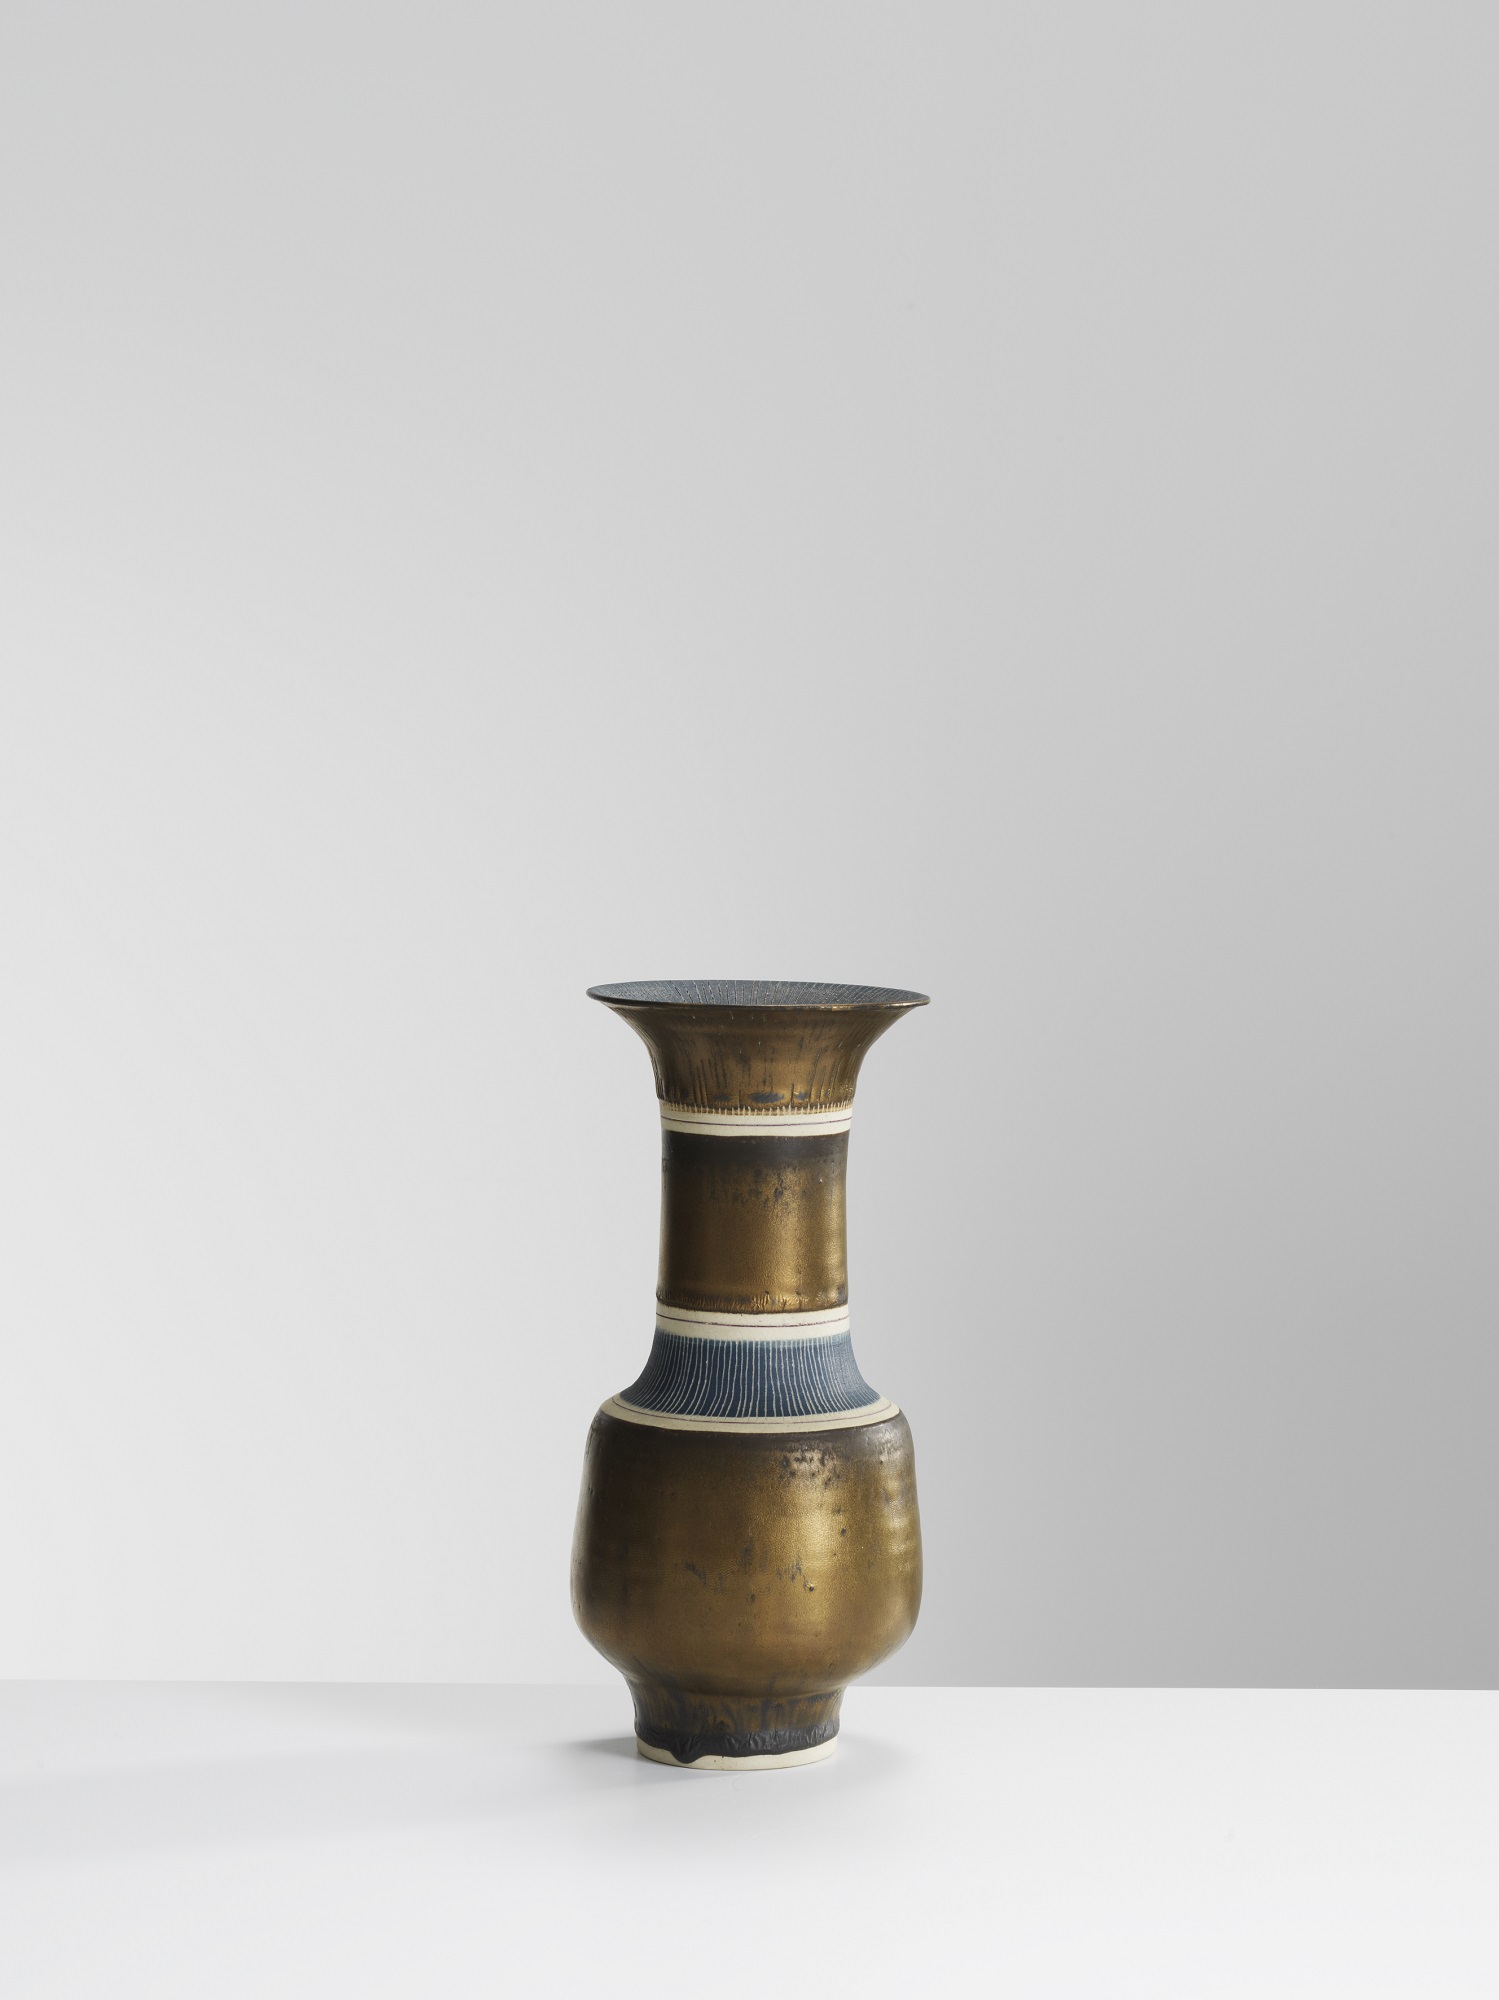 Lucie Rie, Bronze Vase with sgra ffi to, porcelain with manganese glaze (23 x 10.5 cms) Image: Michael Harvey